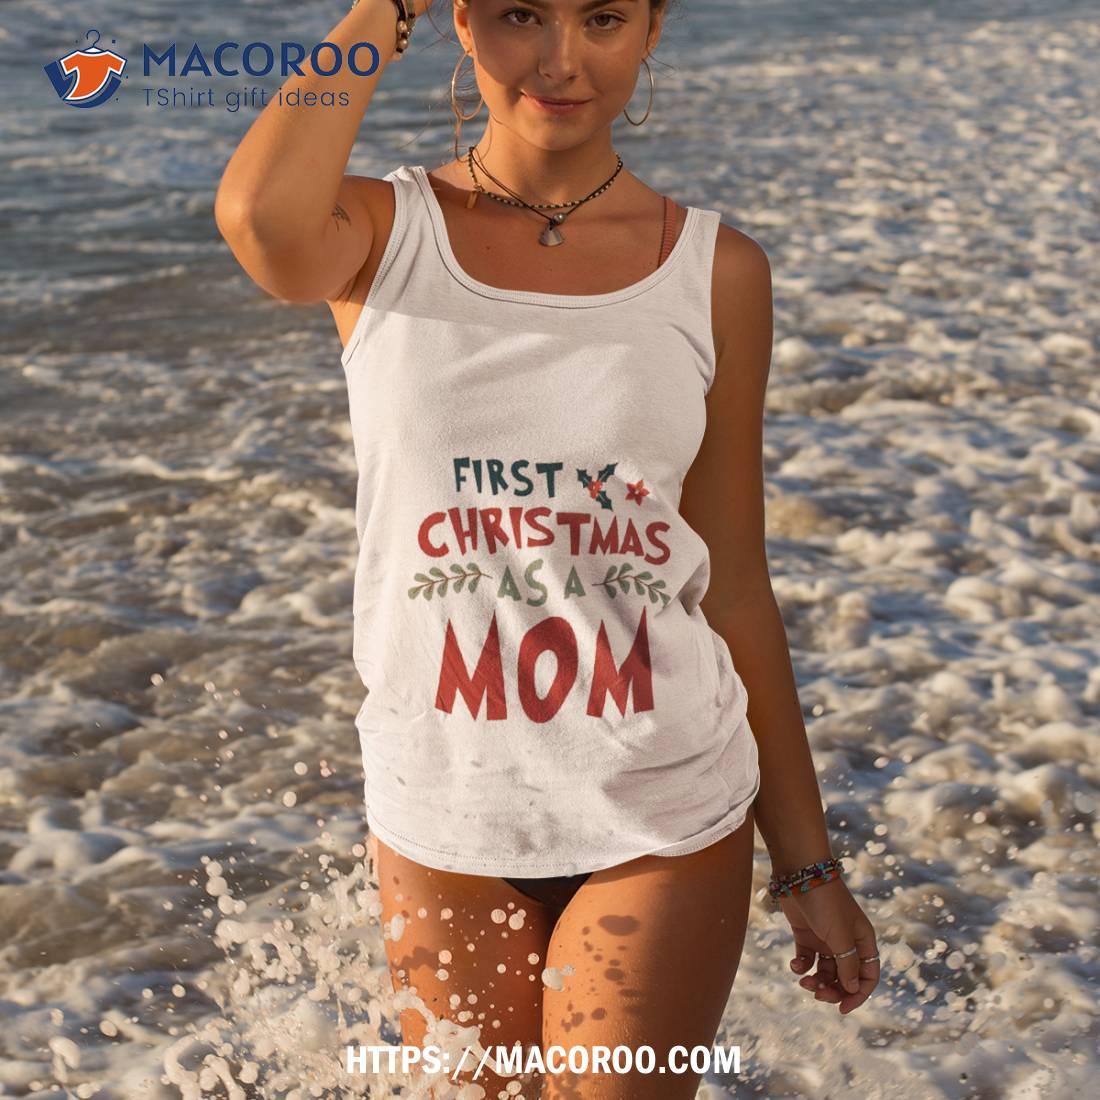 https://images.macoroo.com/wp-content/uploads/2023/08/first-christmas-as-a-mom-funny-xmas-mothers-shirt-best-christmas-gifts-for-new-moms-tank-top.jpg